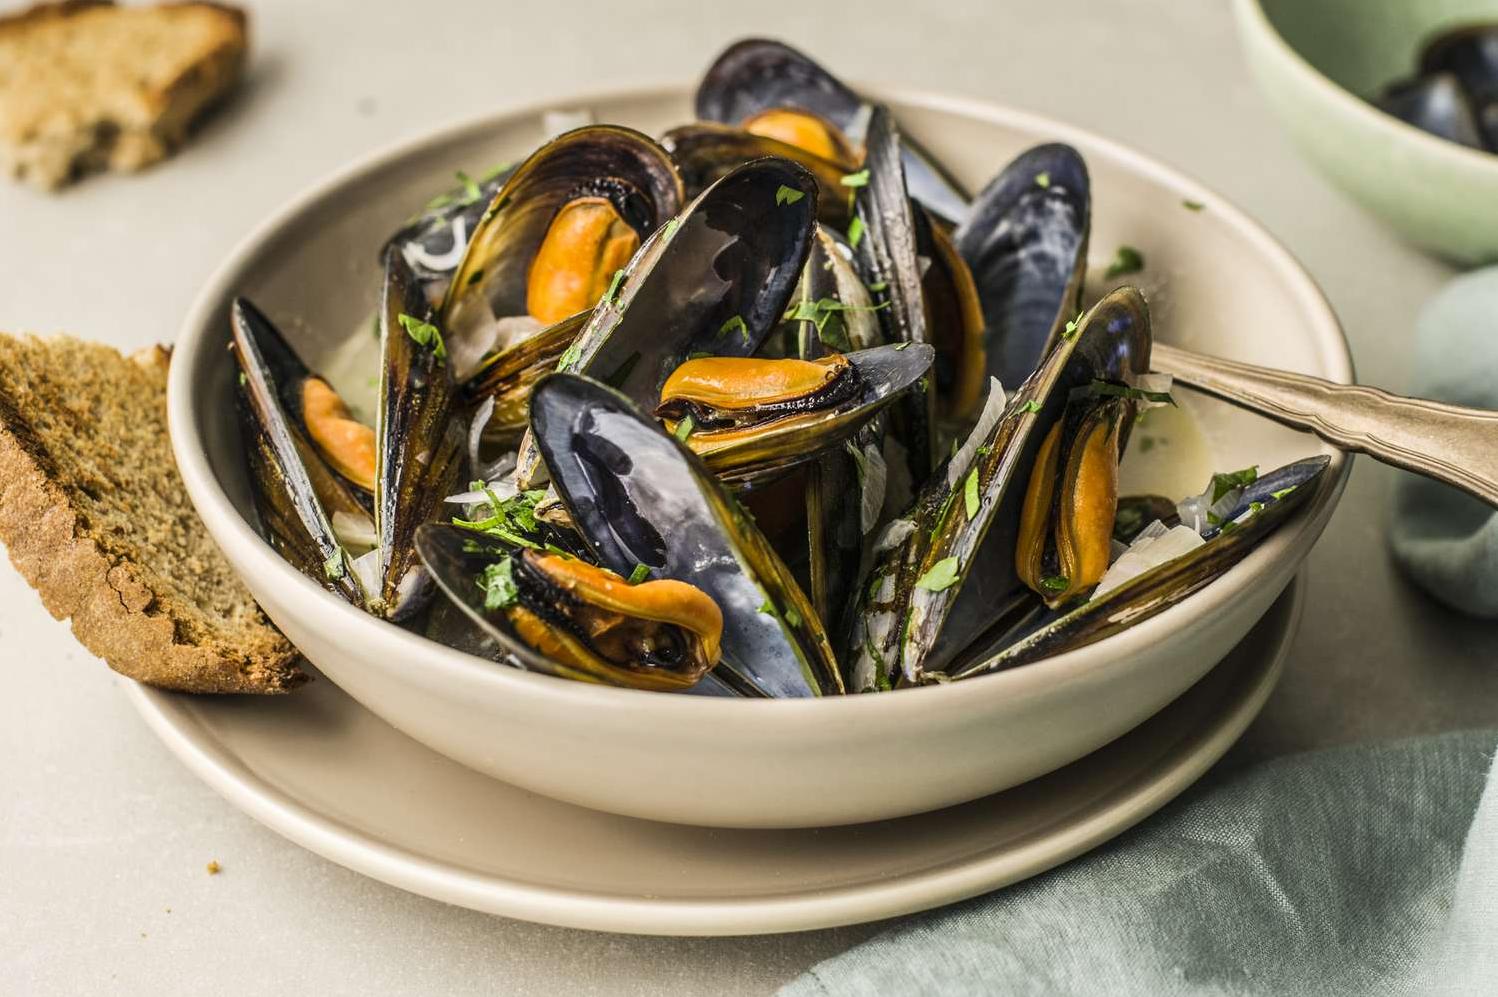 Delicious Steamed Mussels in a White Wine Sauce Recipe